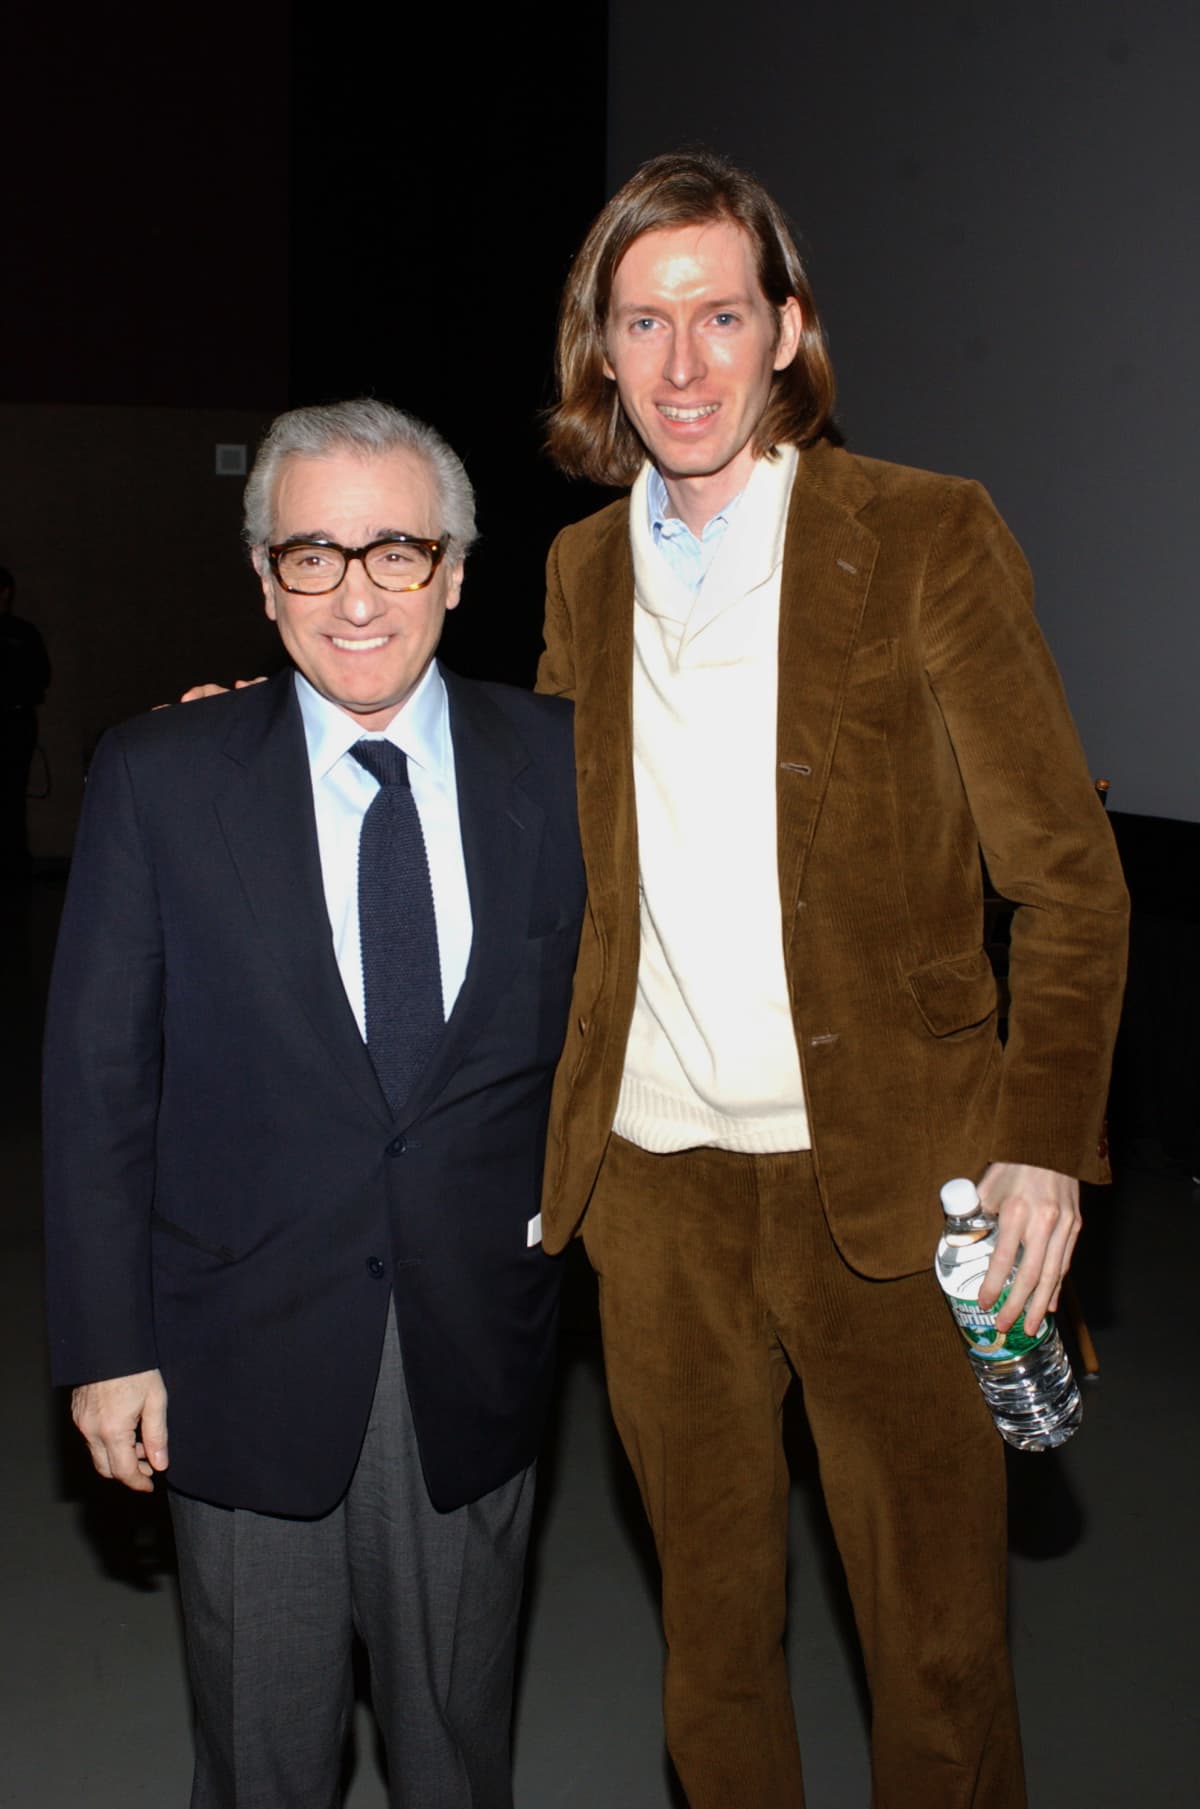 NEW YORK - DECEMBER 13: Wes Anderson and Martin Scorsese (L) speak at the AMC Empire 25 Theaters on December 13, 2004 in New York City. (Photo by Brad Barket/Getty Images)